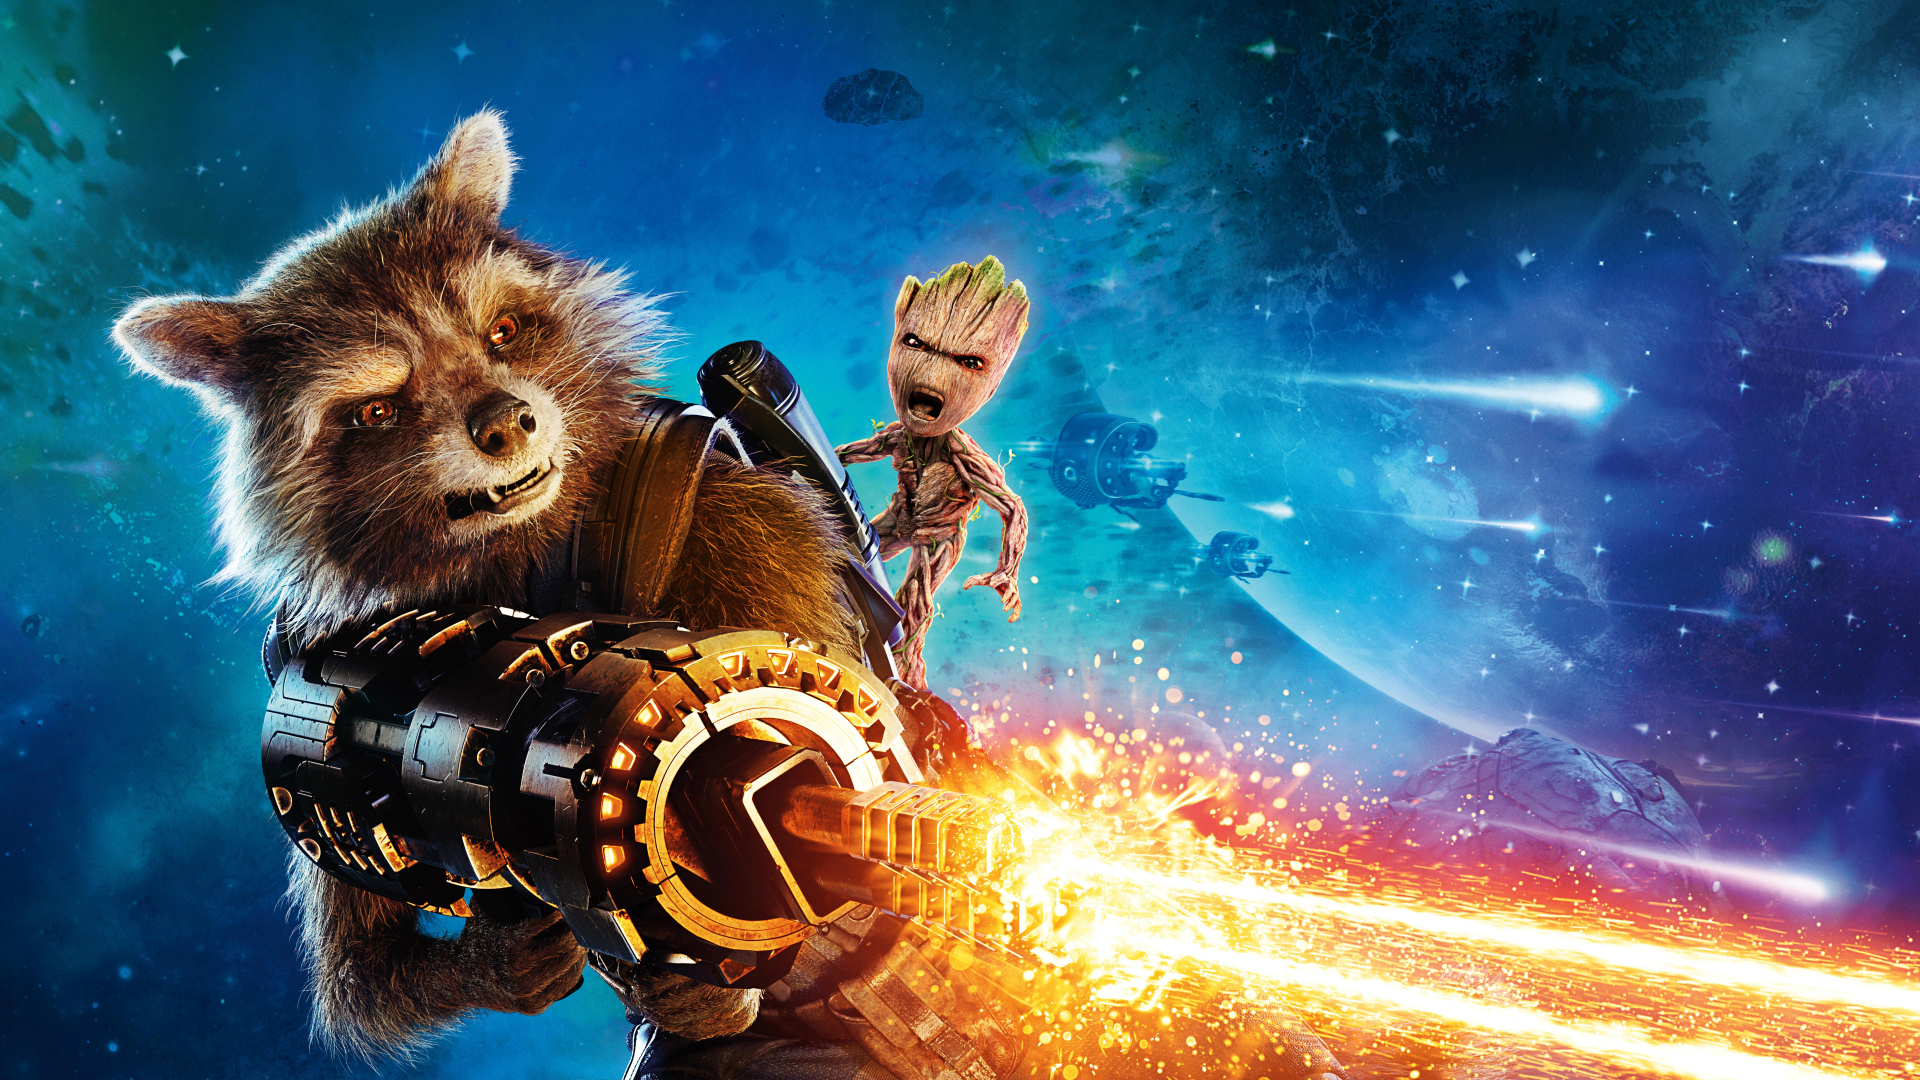 Download 1920x1080 Wallpaper Baby Groot And Rocket Raccoon, Guardians Of The Galaxy Vol Movie, 4k, 8k, Full Hd, Hdtv, Fhd, 1080p, 1920x1080 HD Image, Background, 14219